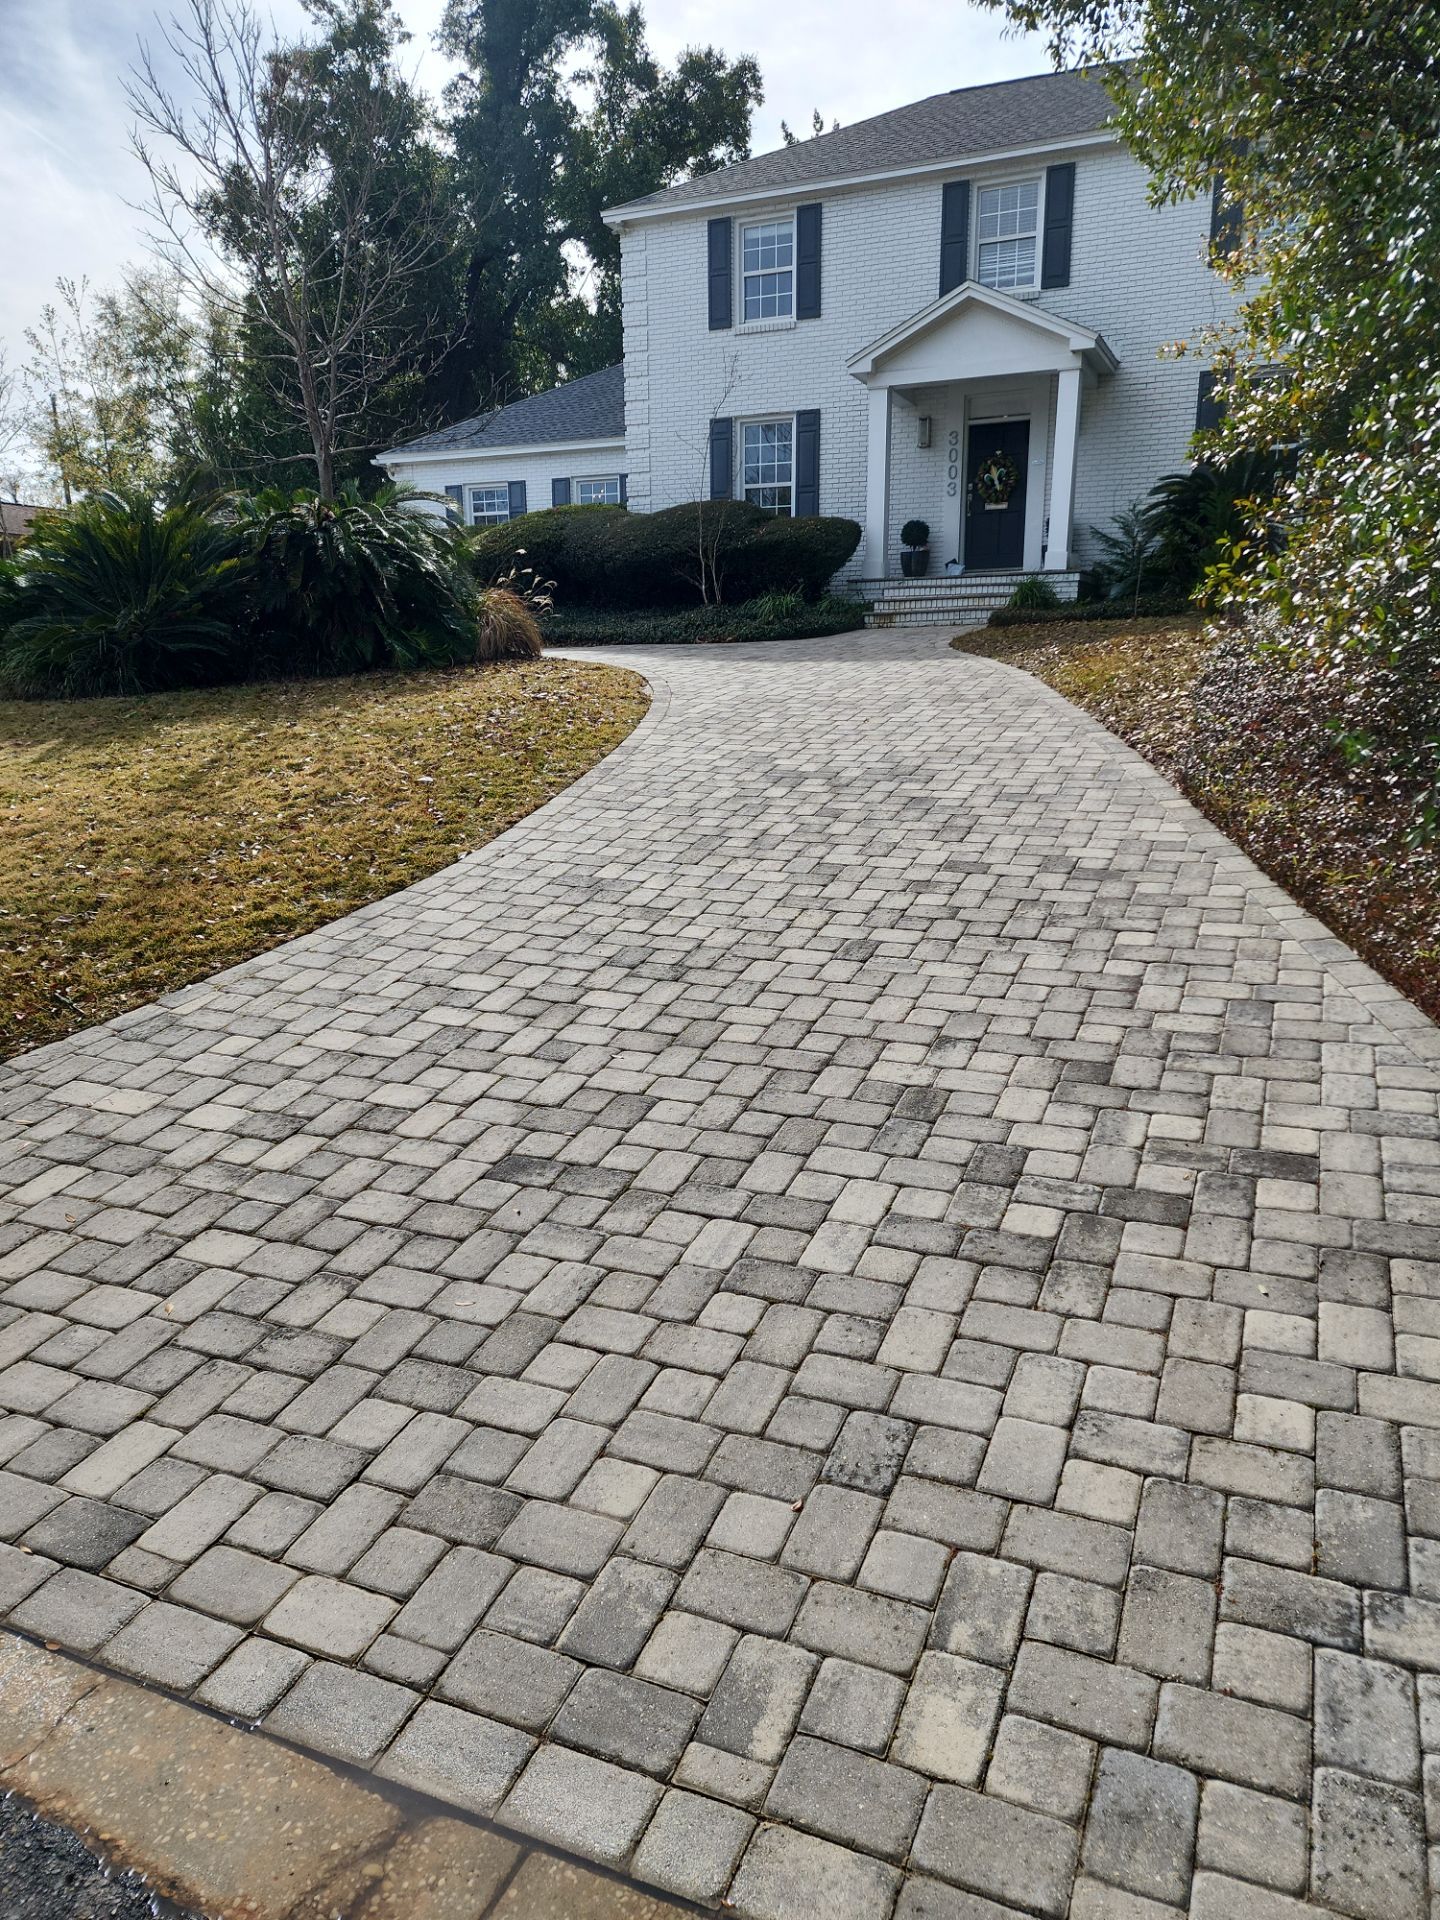 Driveway Walkway Concrete Brick Pavers Cleaning Project